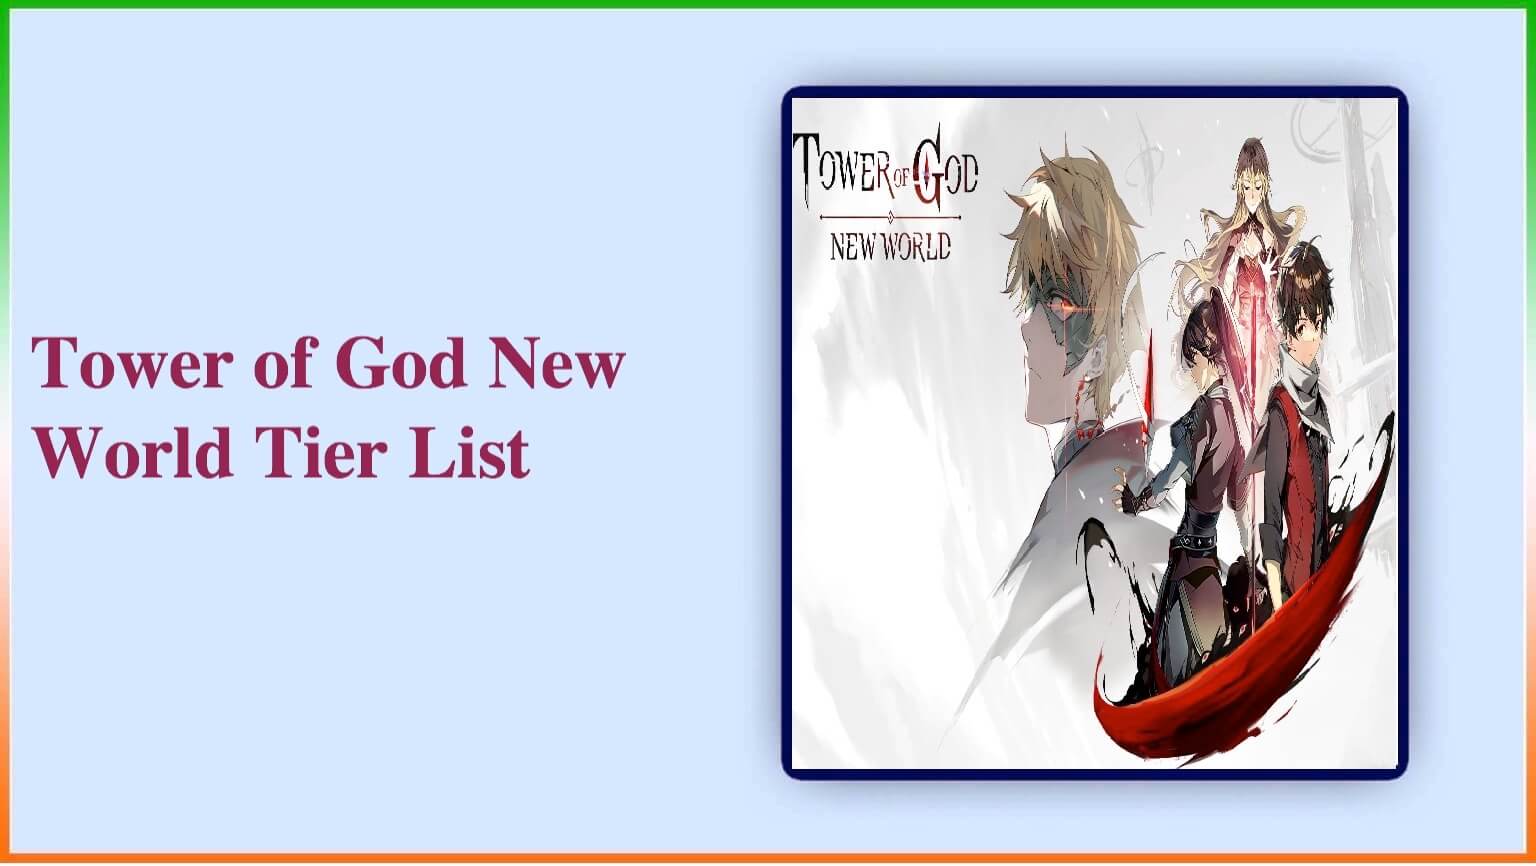 LDPlayer - 🌟 Tower of God - New World Tier List! 🌟 🌟 Exciting